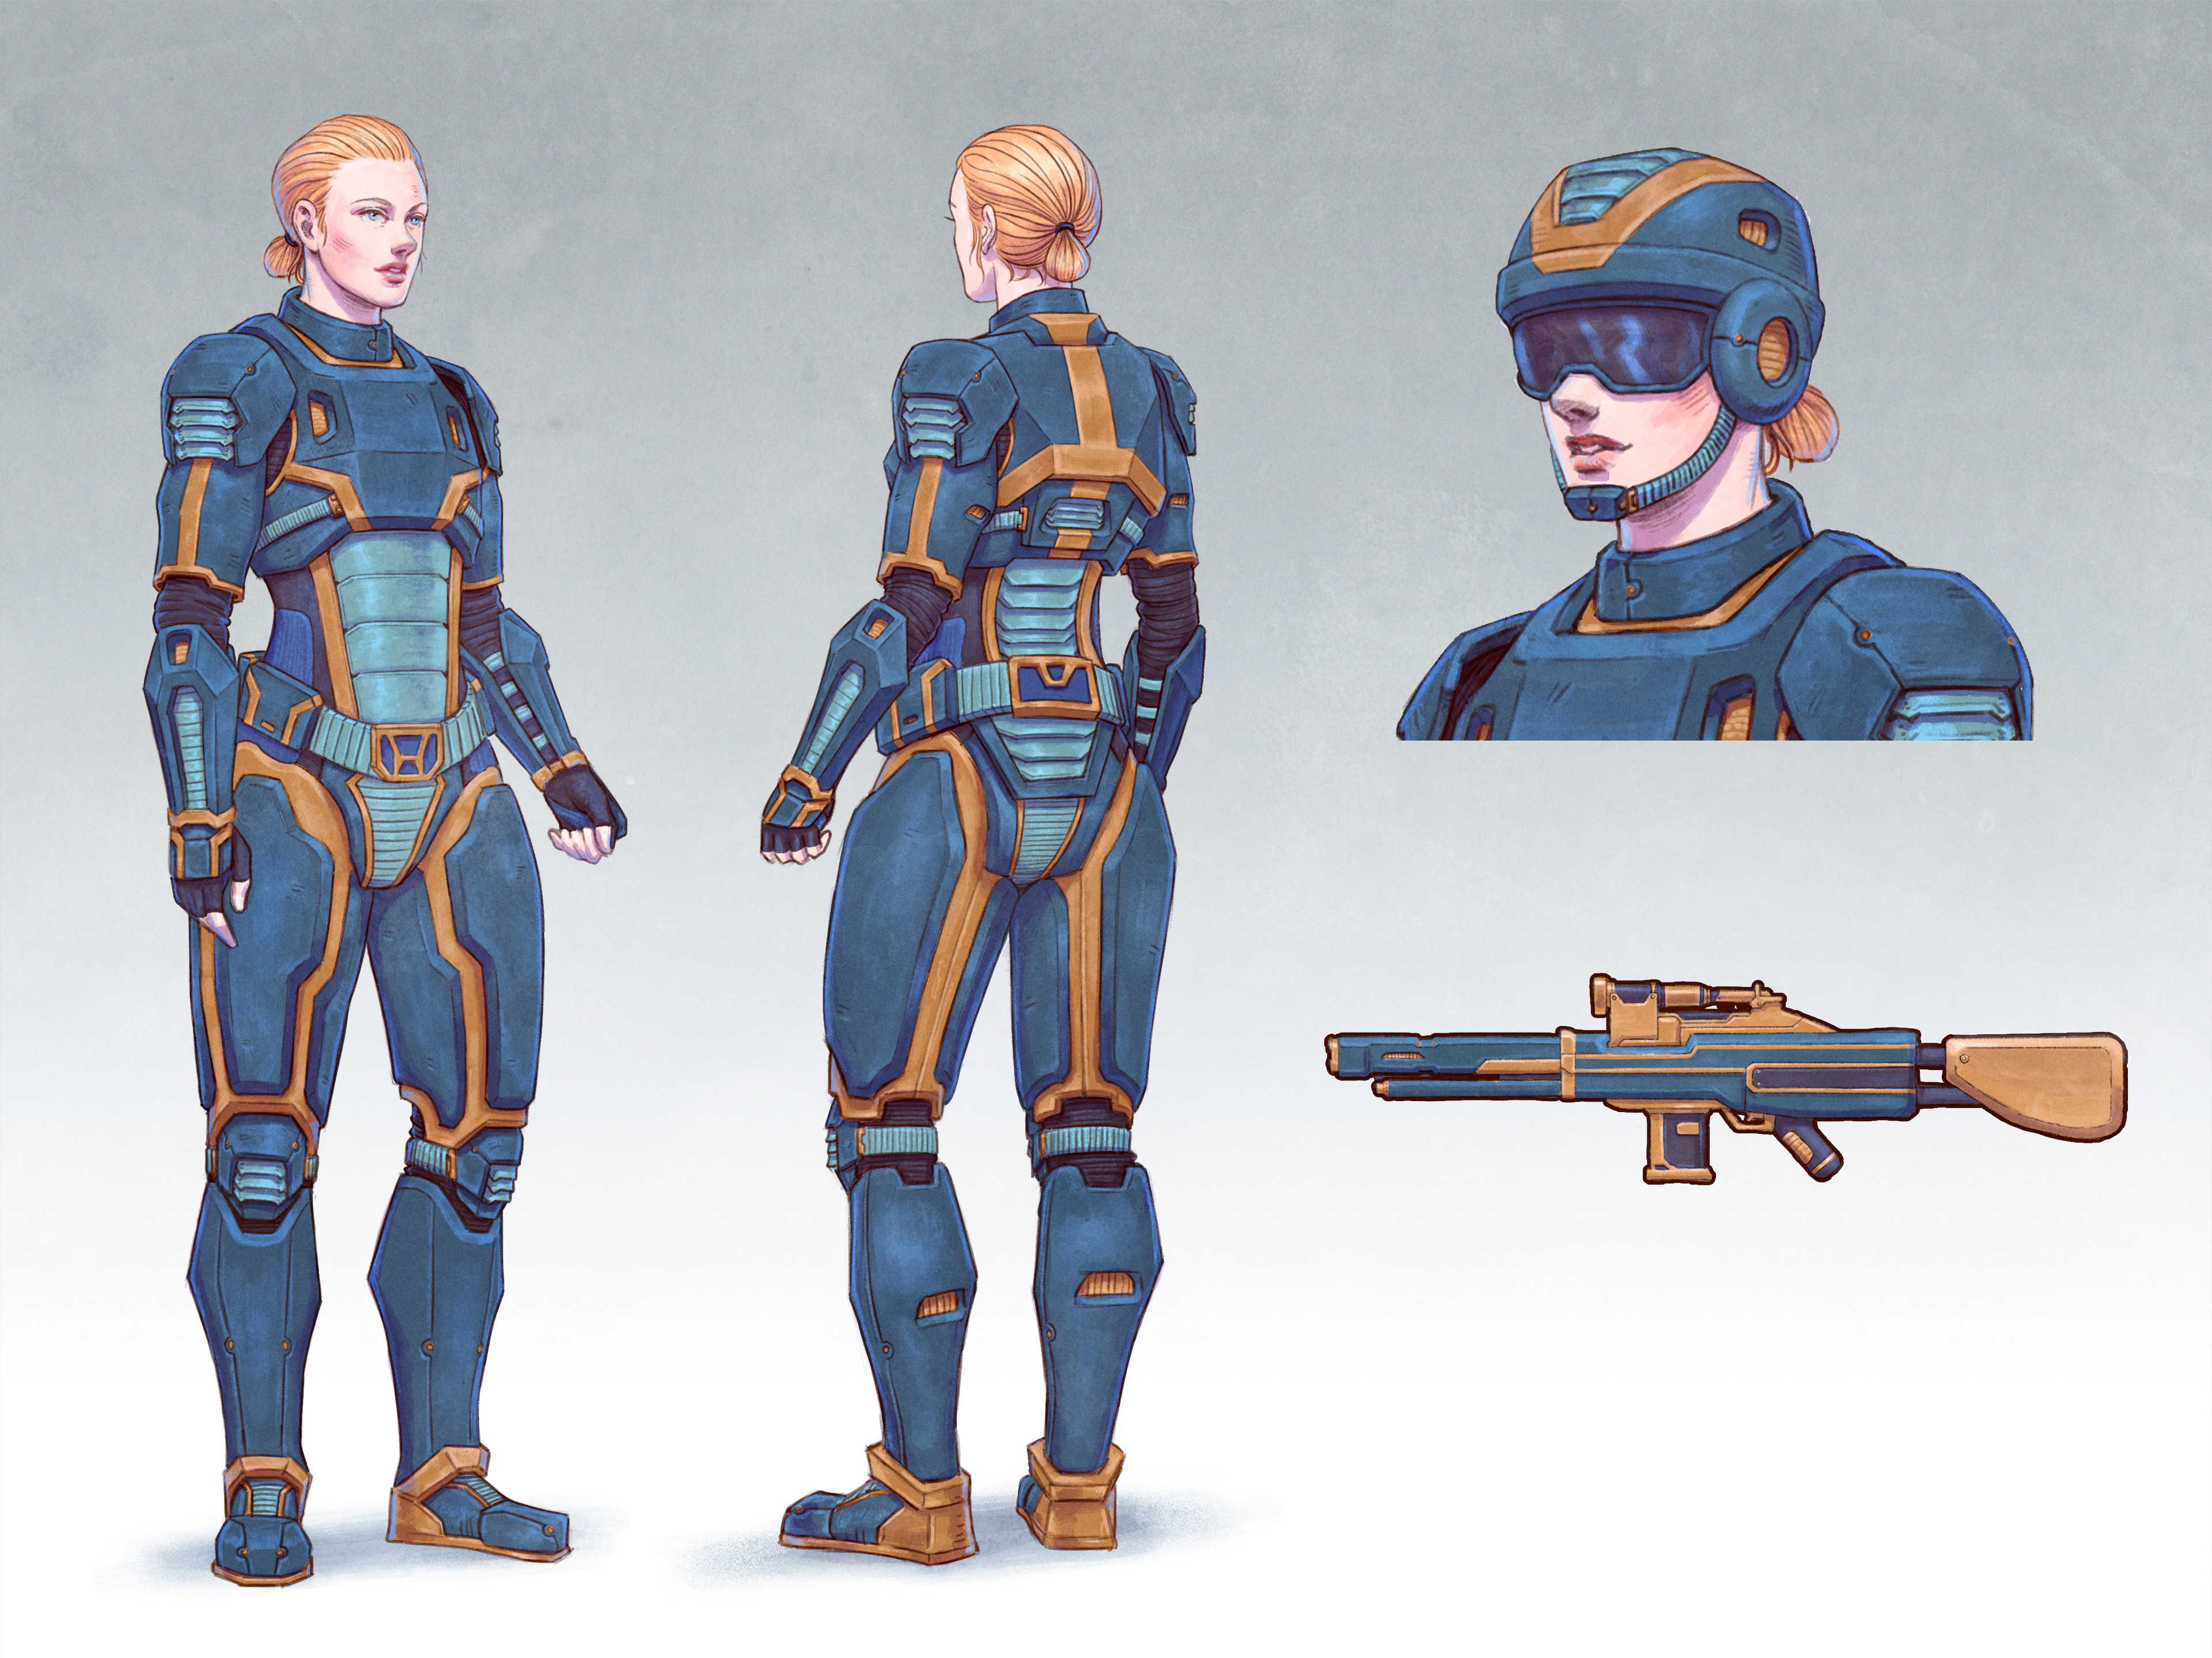 Final concept, with a helmet variation and weapon concept.